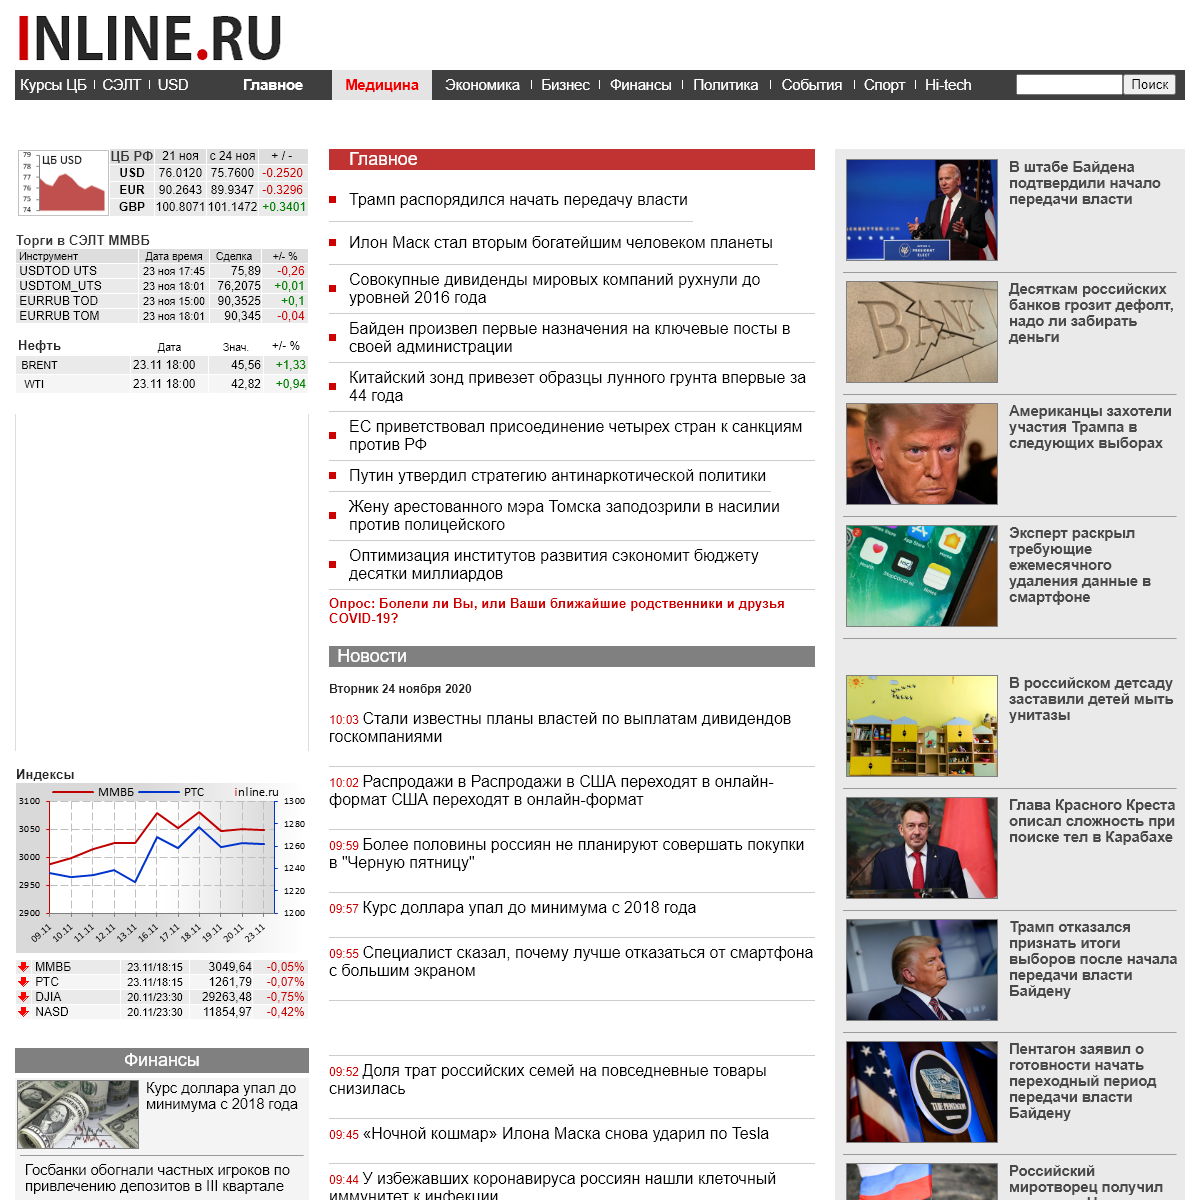 A complete backup of inline.ru